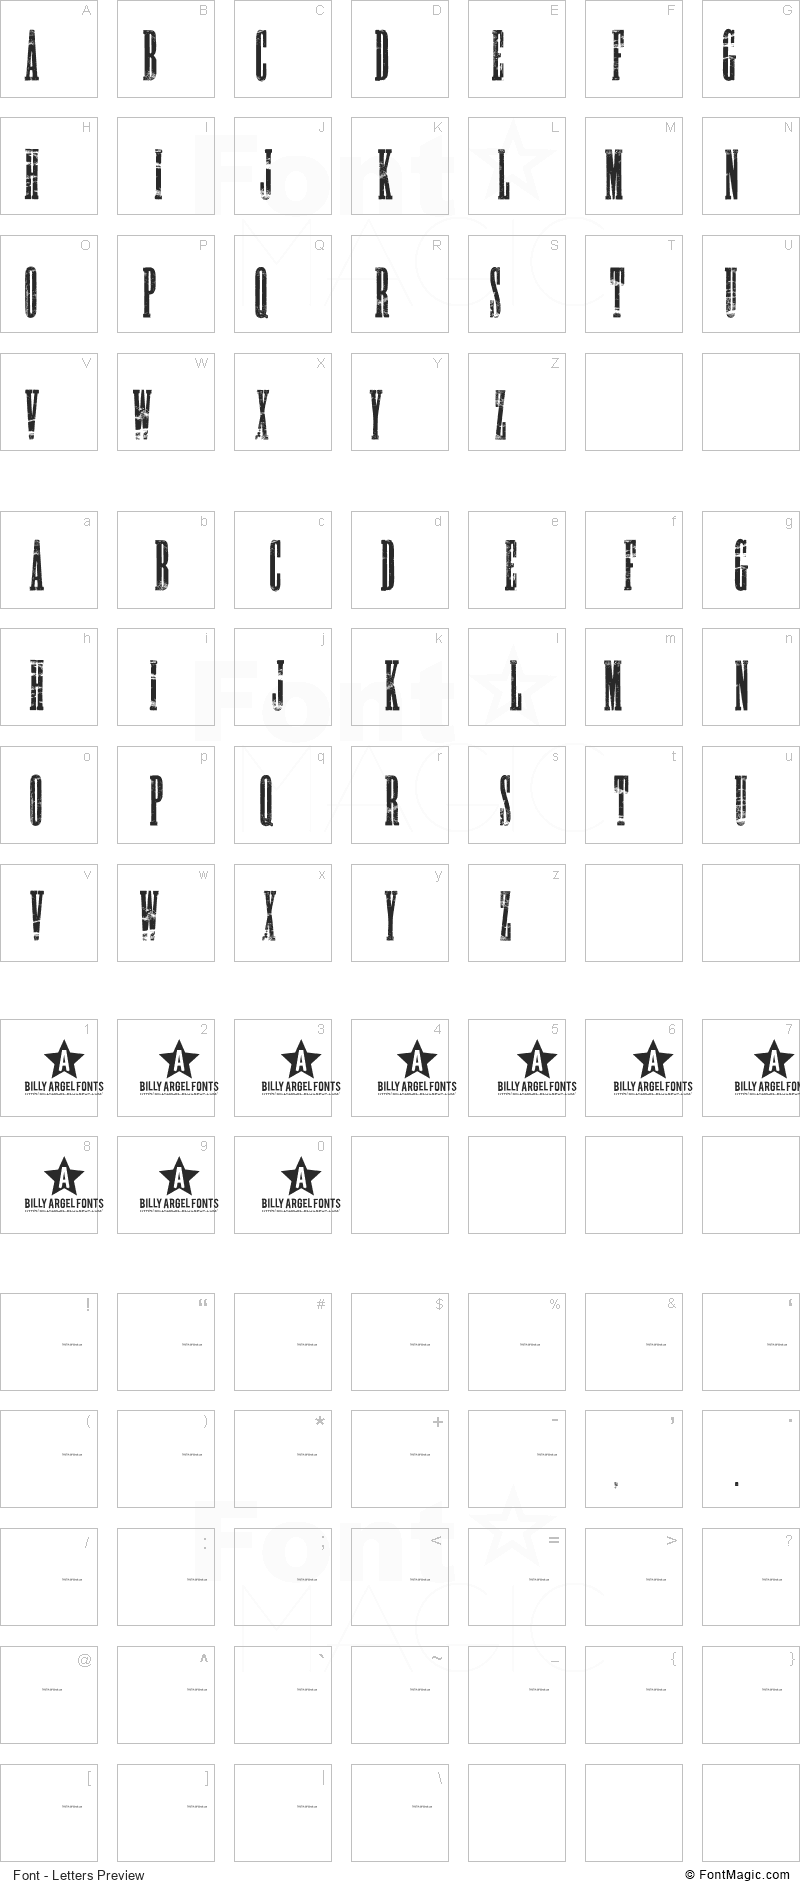 Night Stalker Font - All Latters Preview Chart